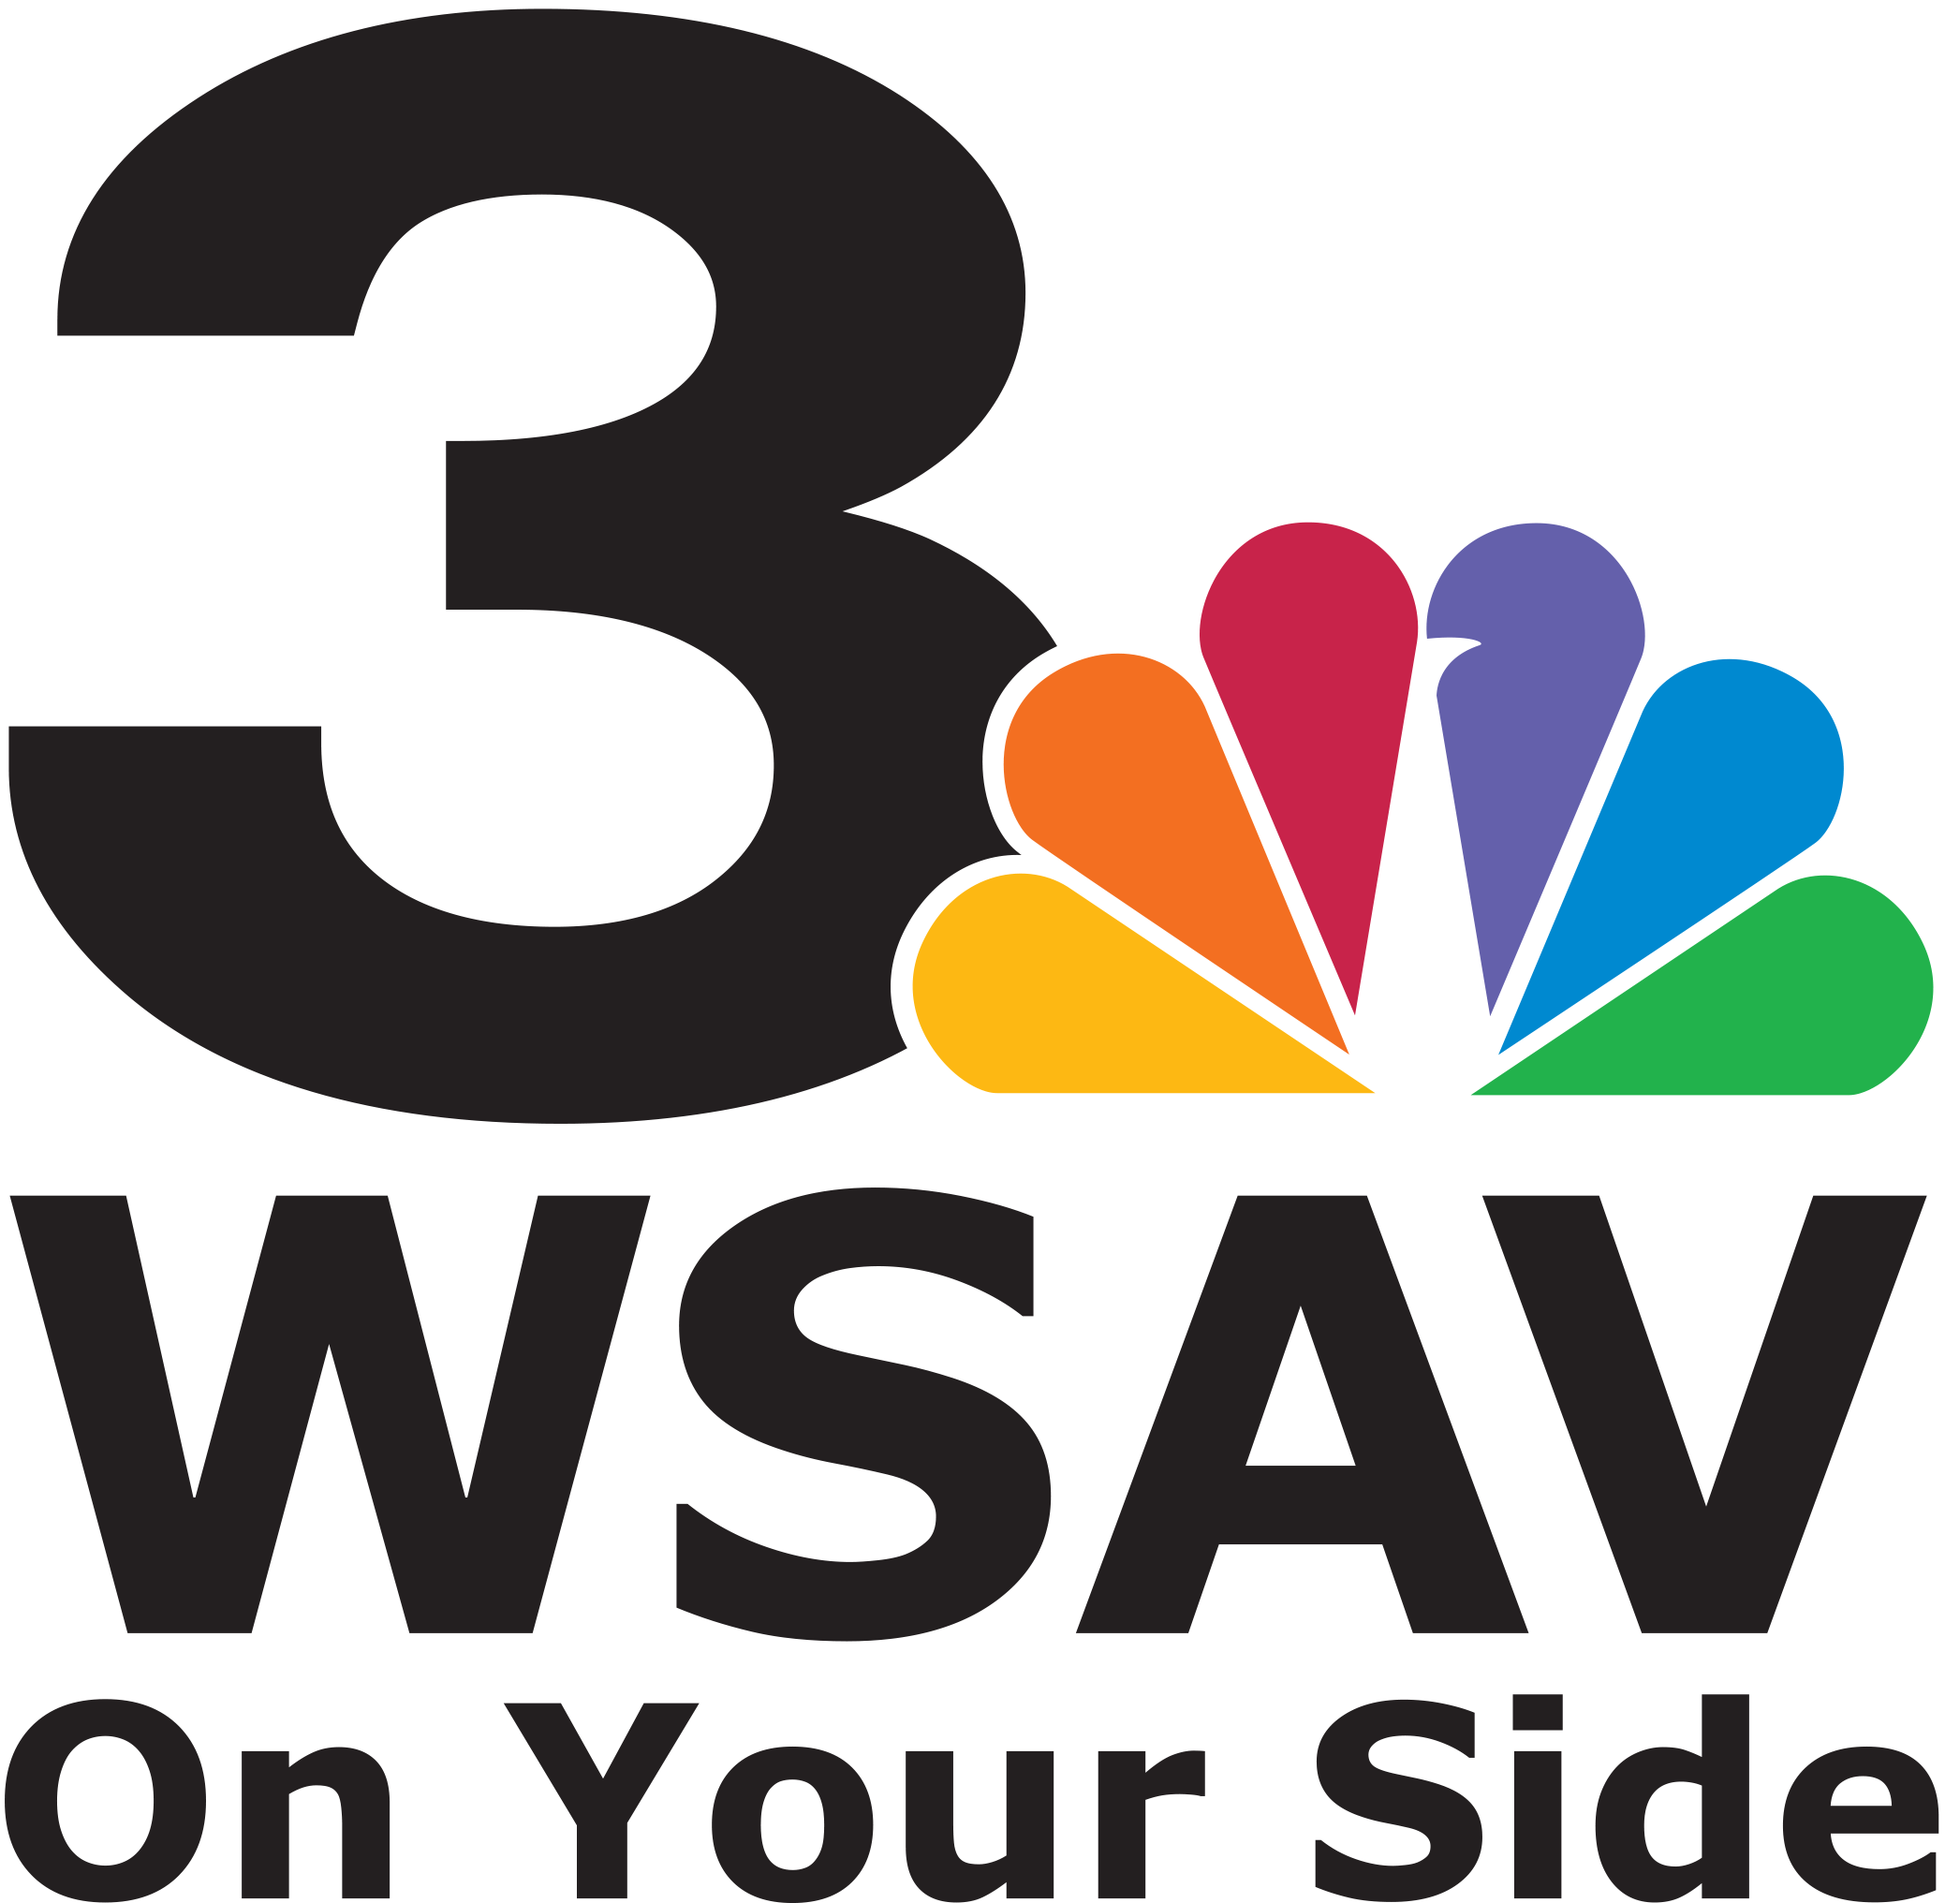 WSAV 3 OYS stacked black (1).png